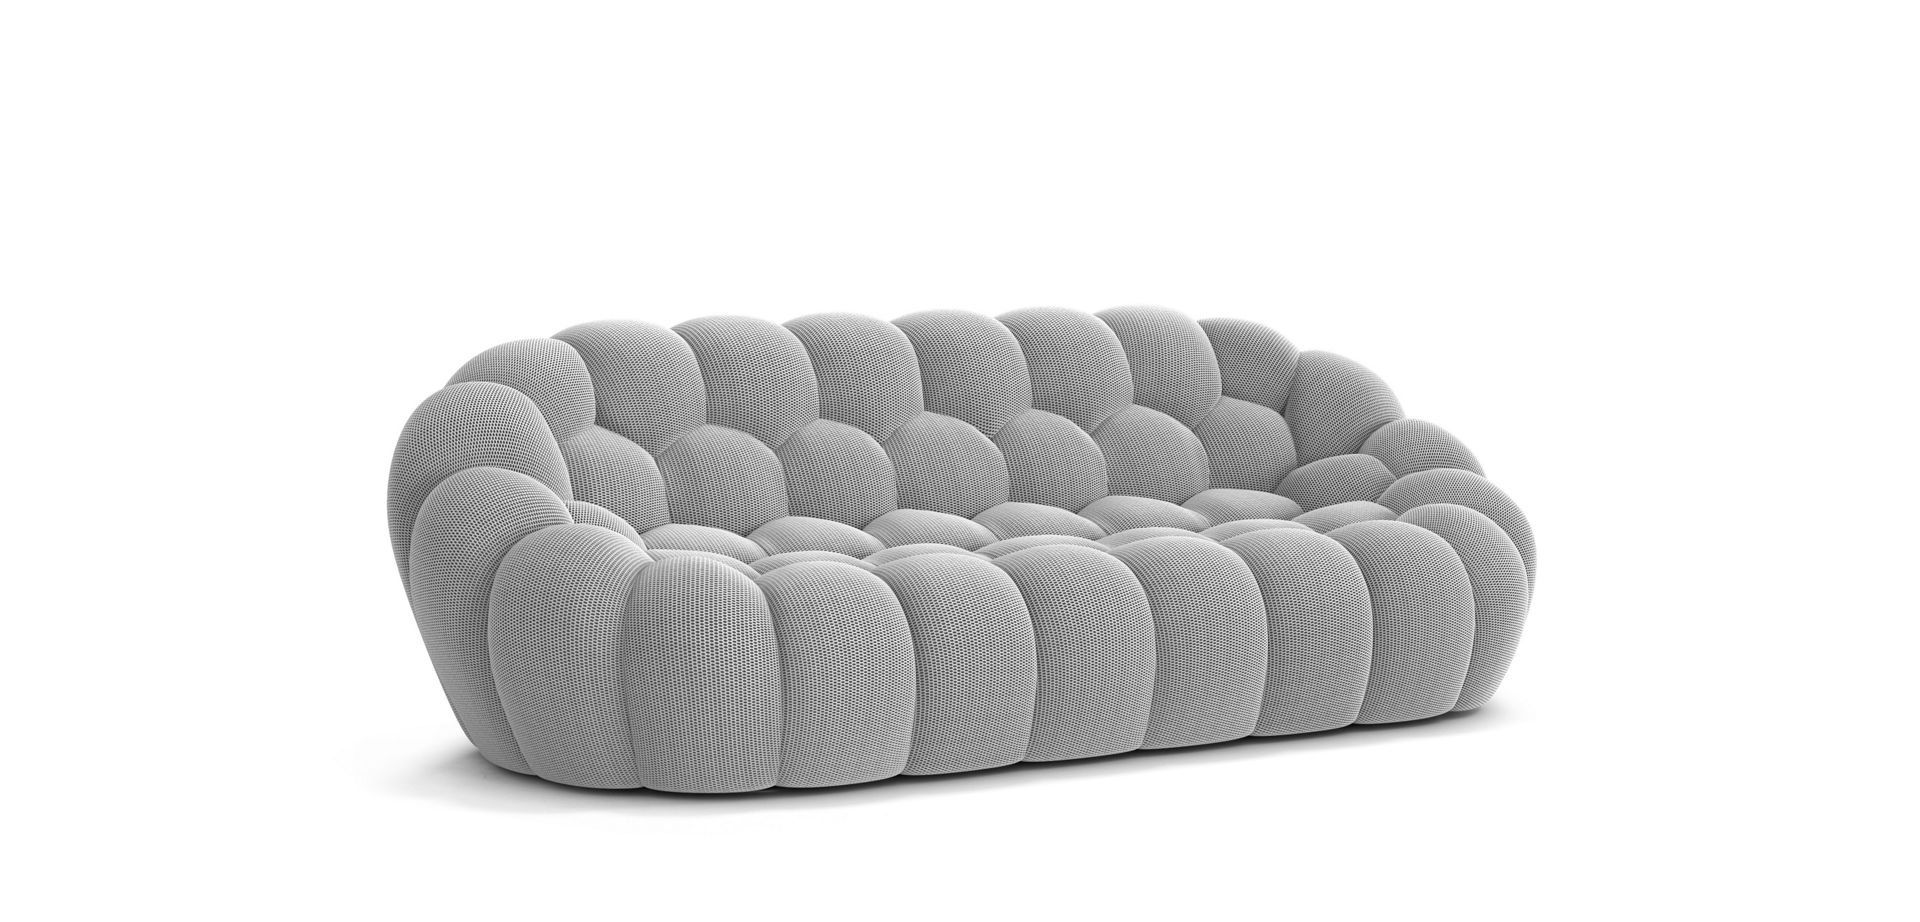 large 3-seat sofa - techno 3D image number 2